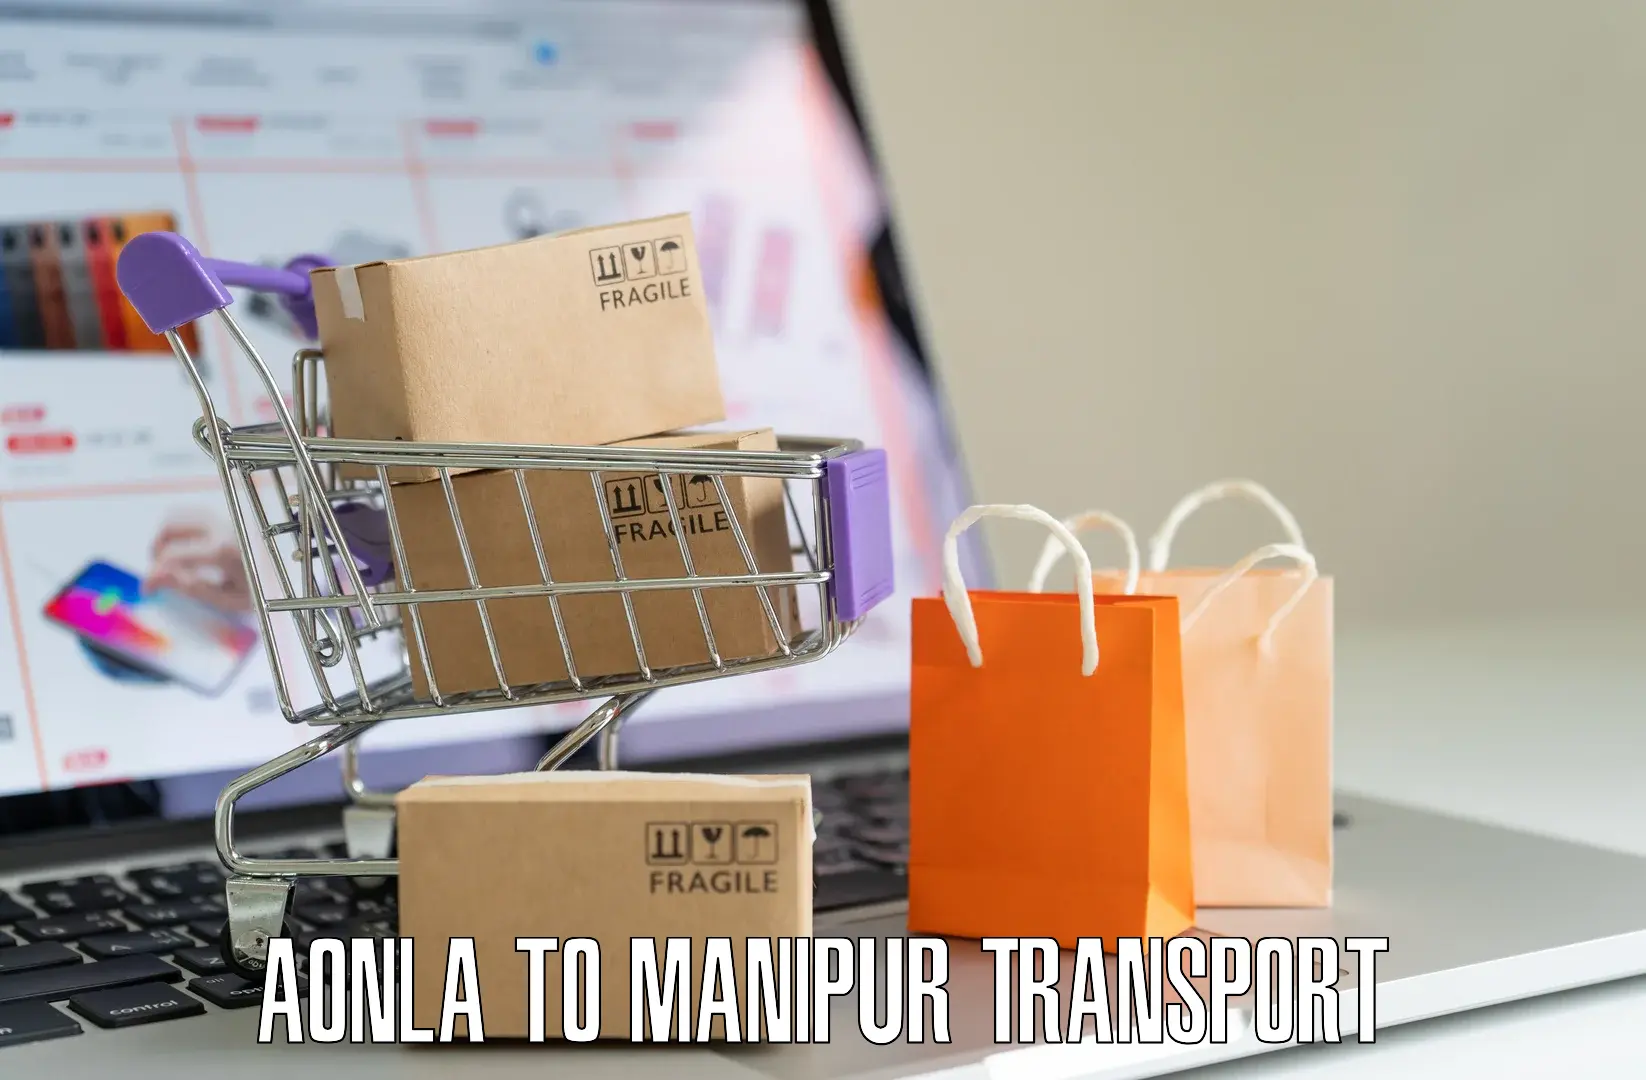 Two wheeler transport services Aonla to Manipur